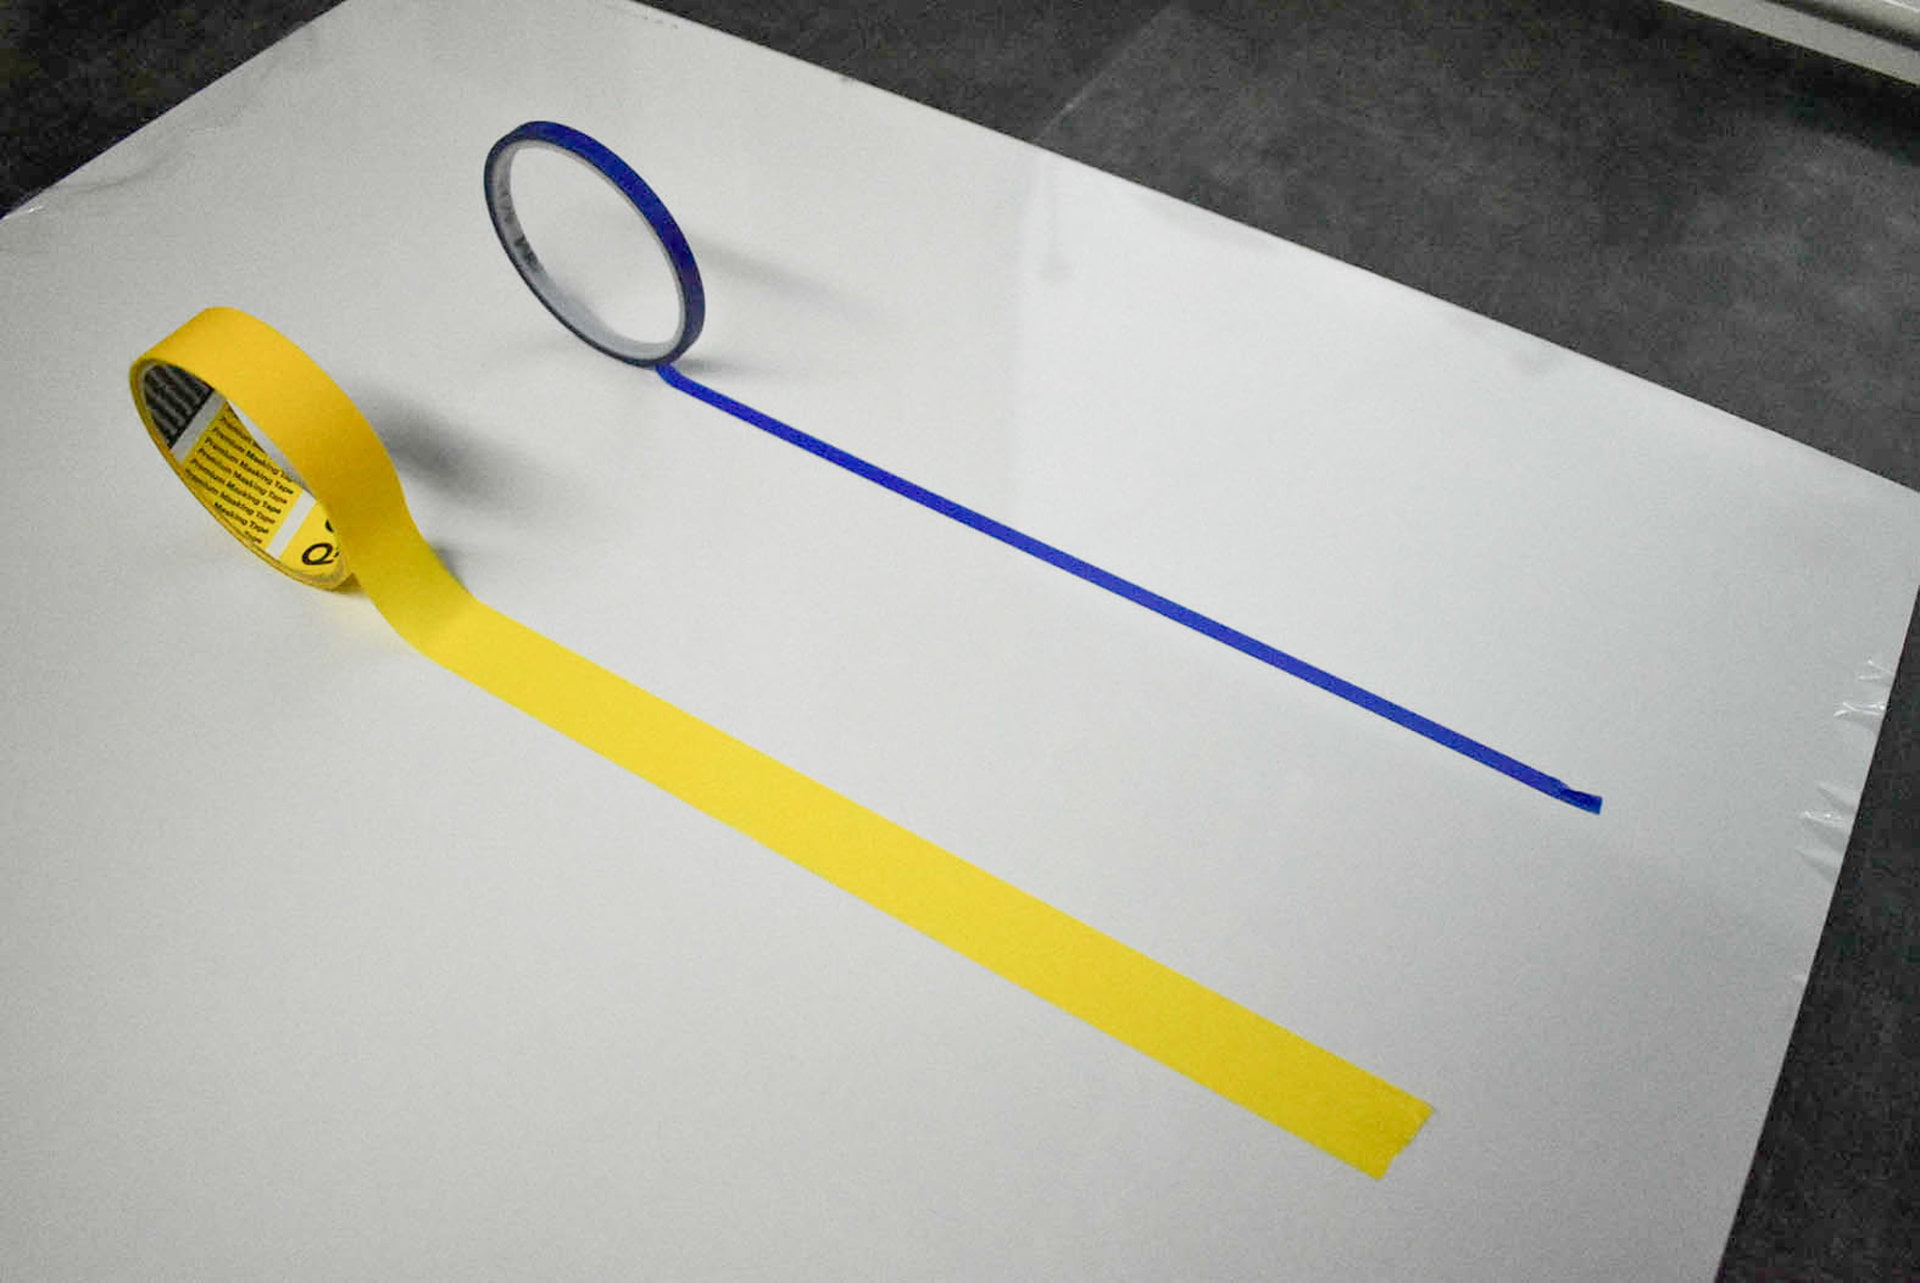 How to use adhesive tape for making painted signs